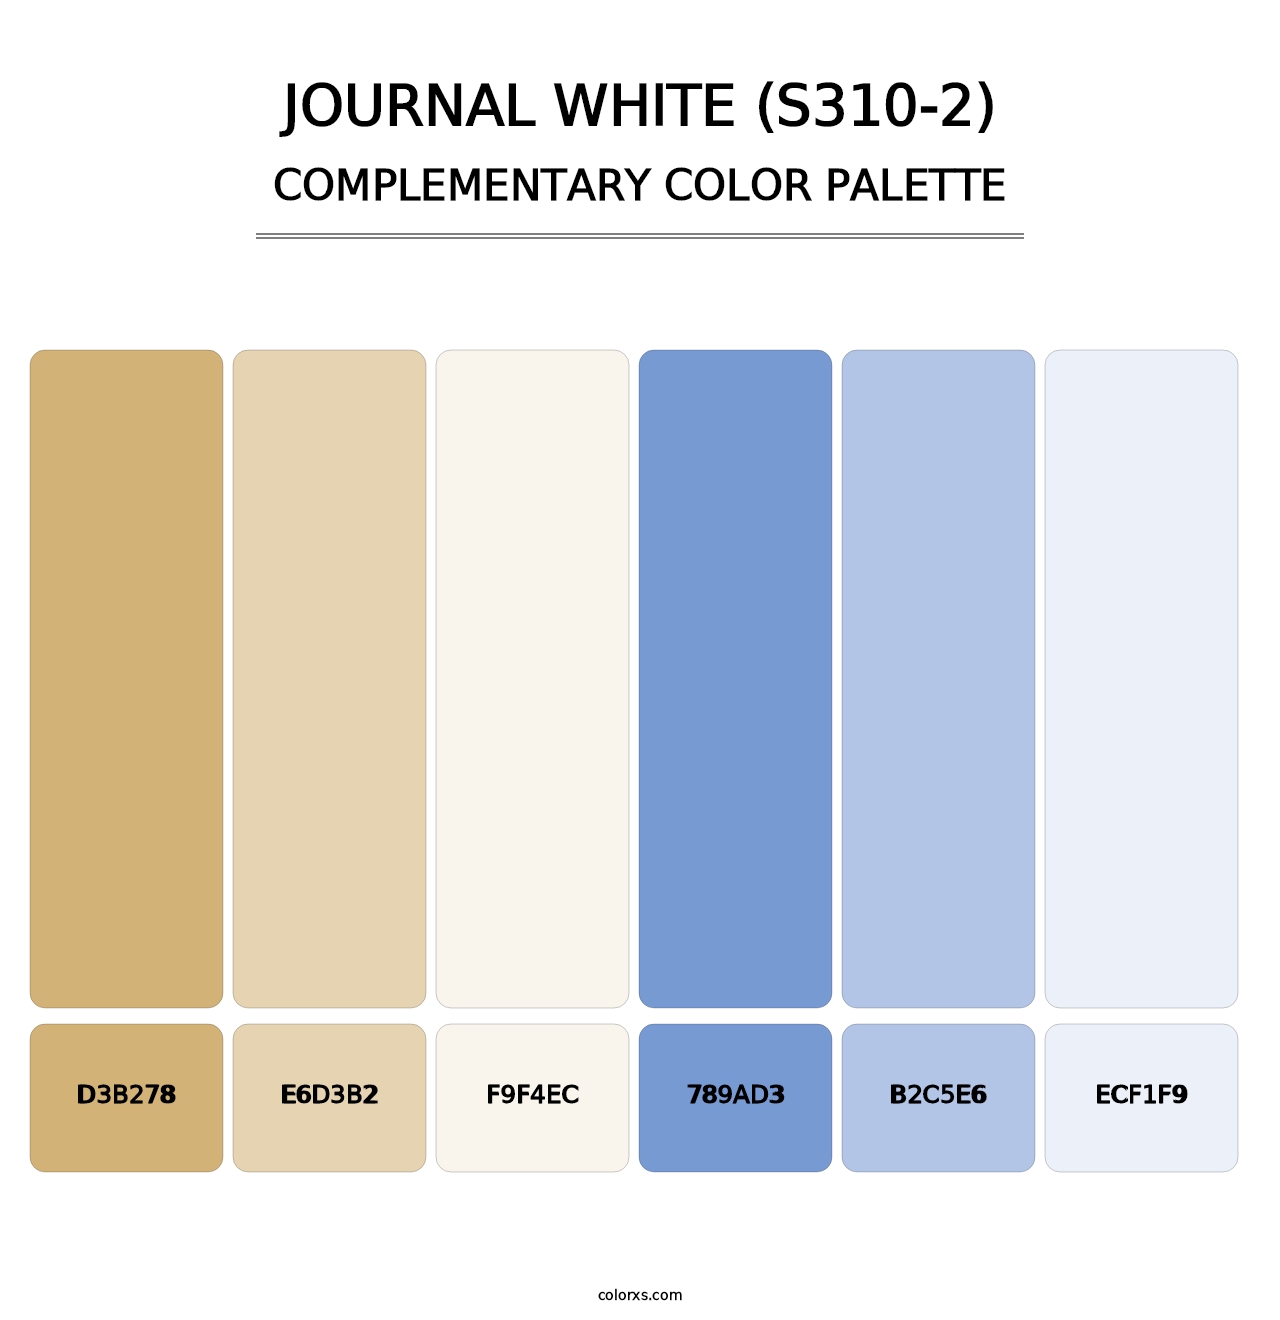 Journal White (S310-2) - Complementary Color Palette